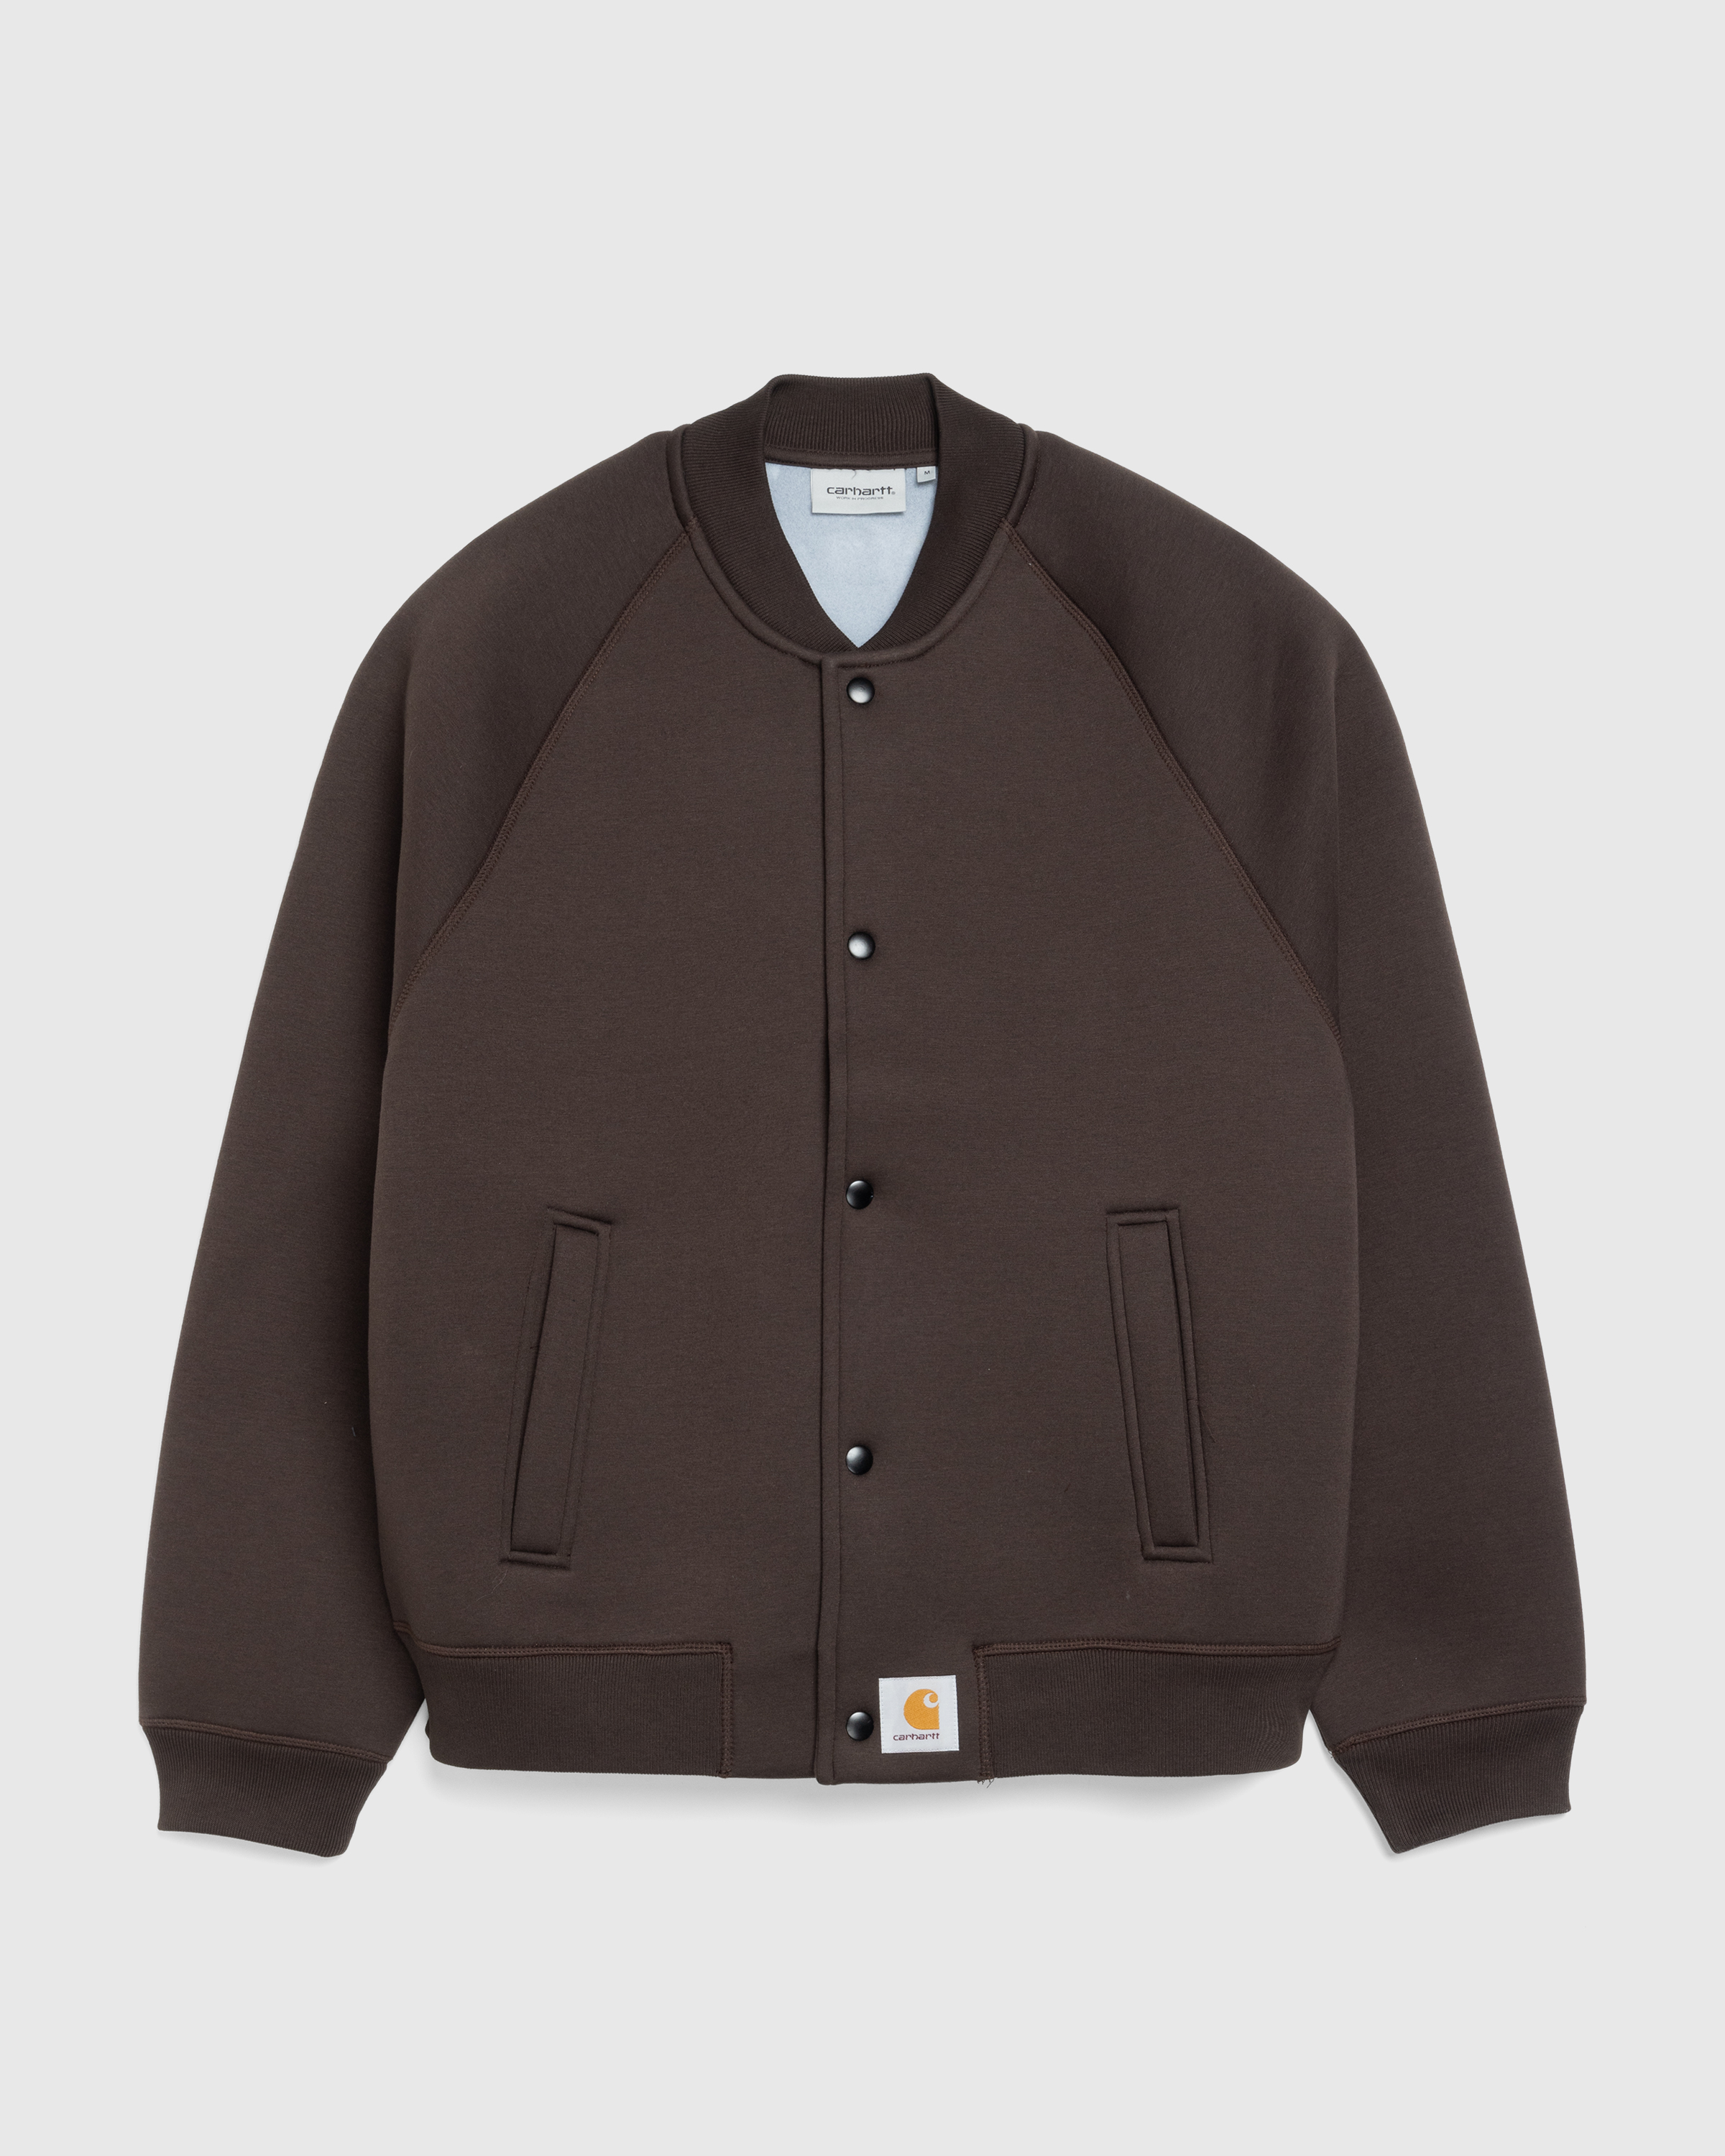 Carhartt WIP – Car-Lux Bomber Tobacco/Grey - Outerwear - Brown - Image 1